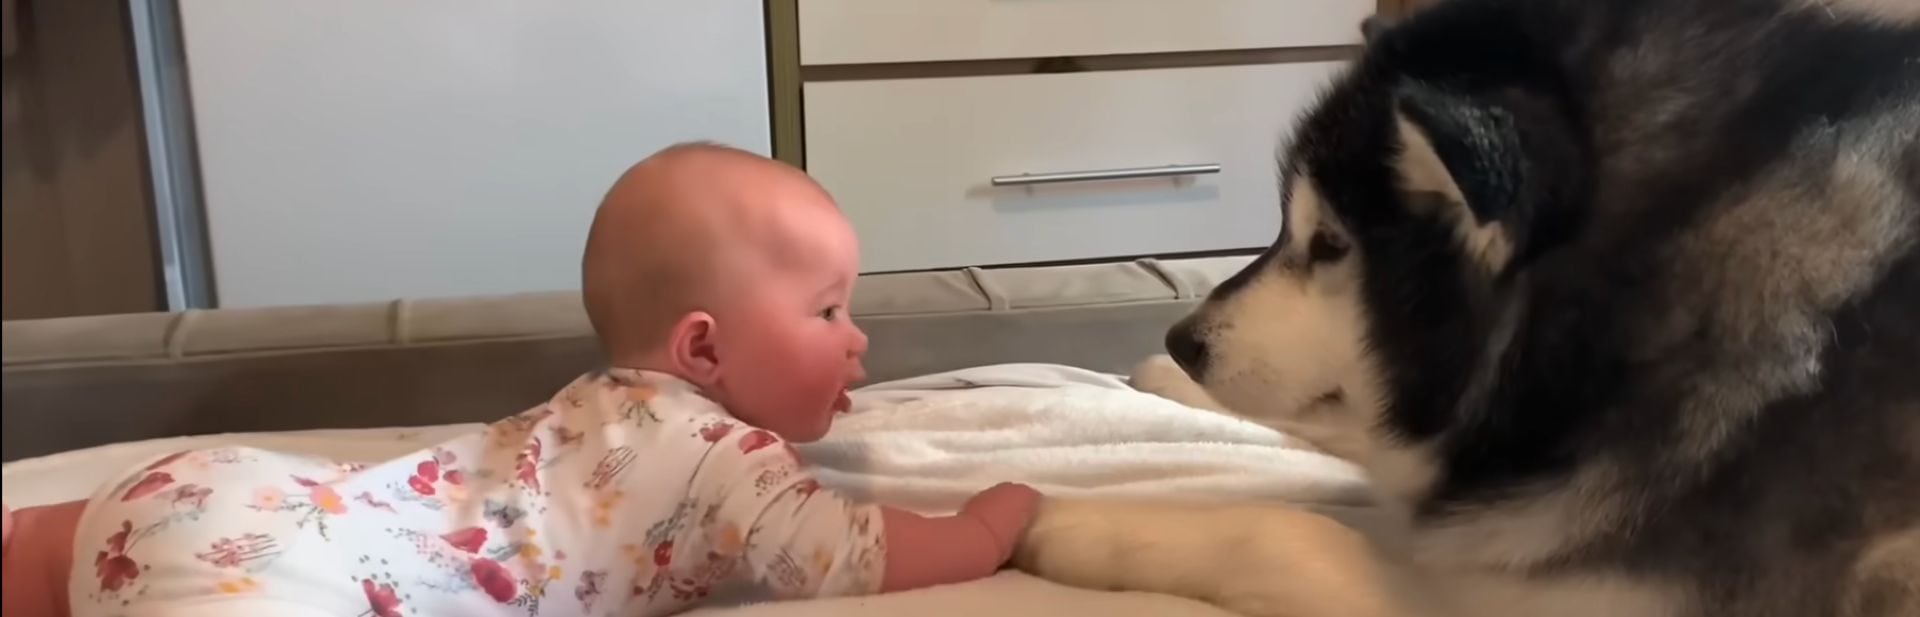 Niko the Malamute Turns Into An Unlikely Tutor For Baby’s Attempts At Crawling